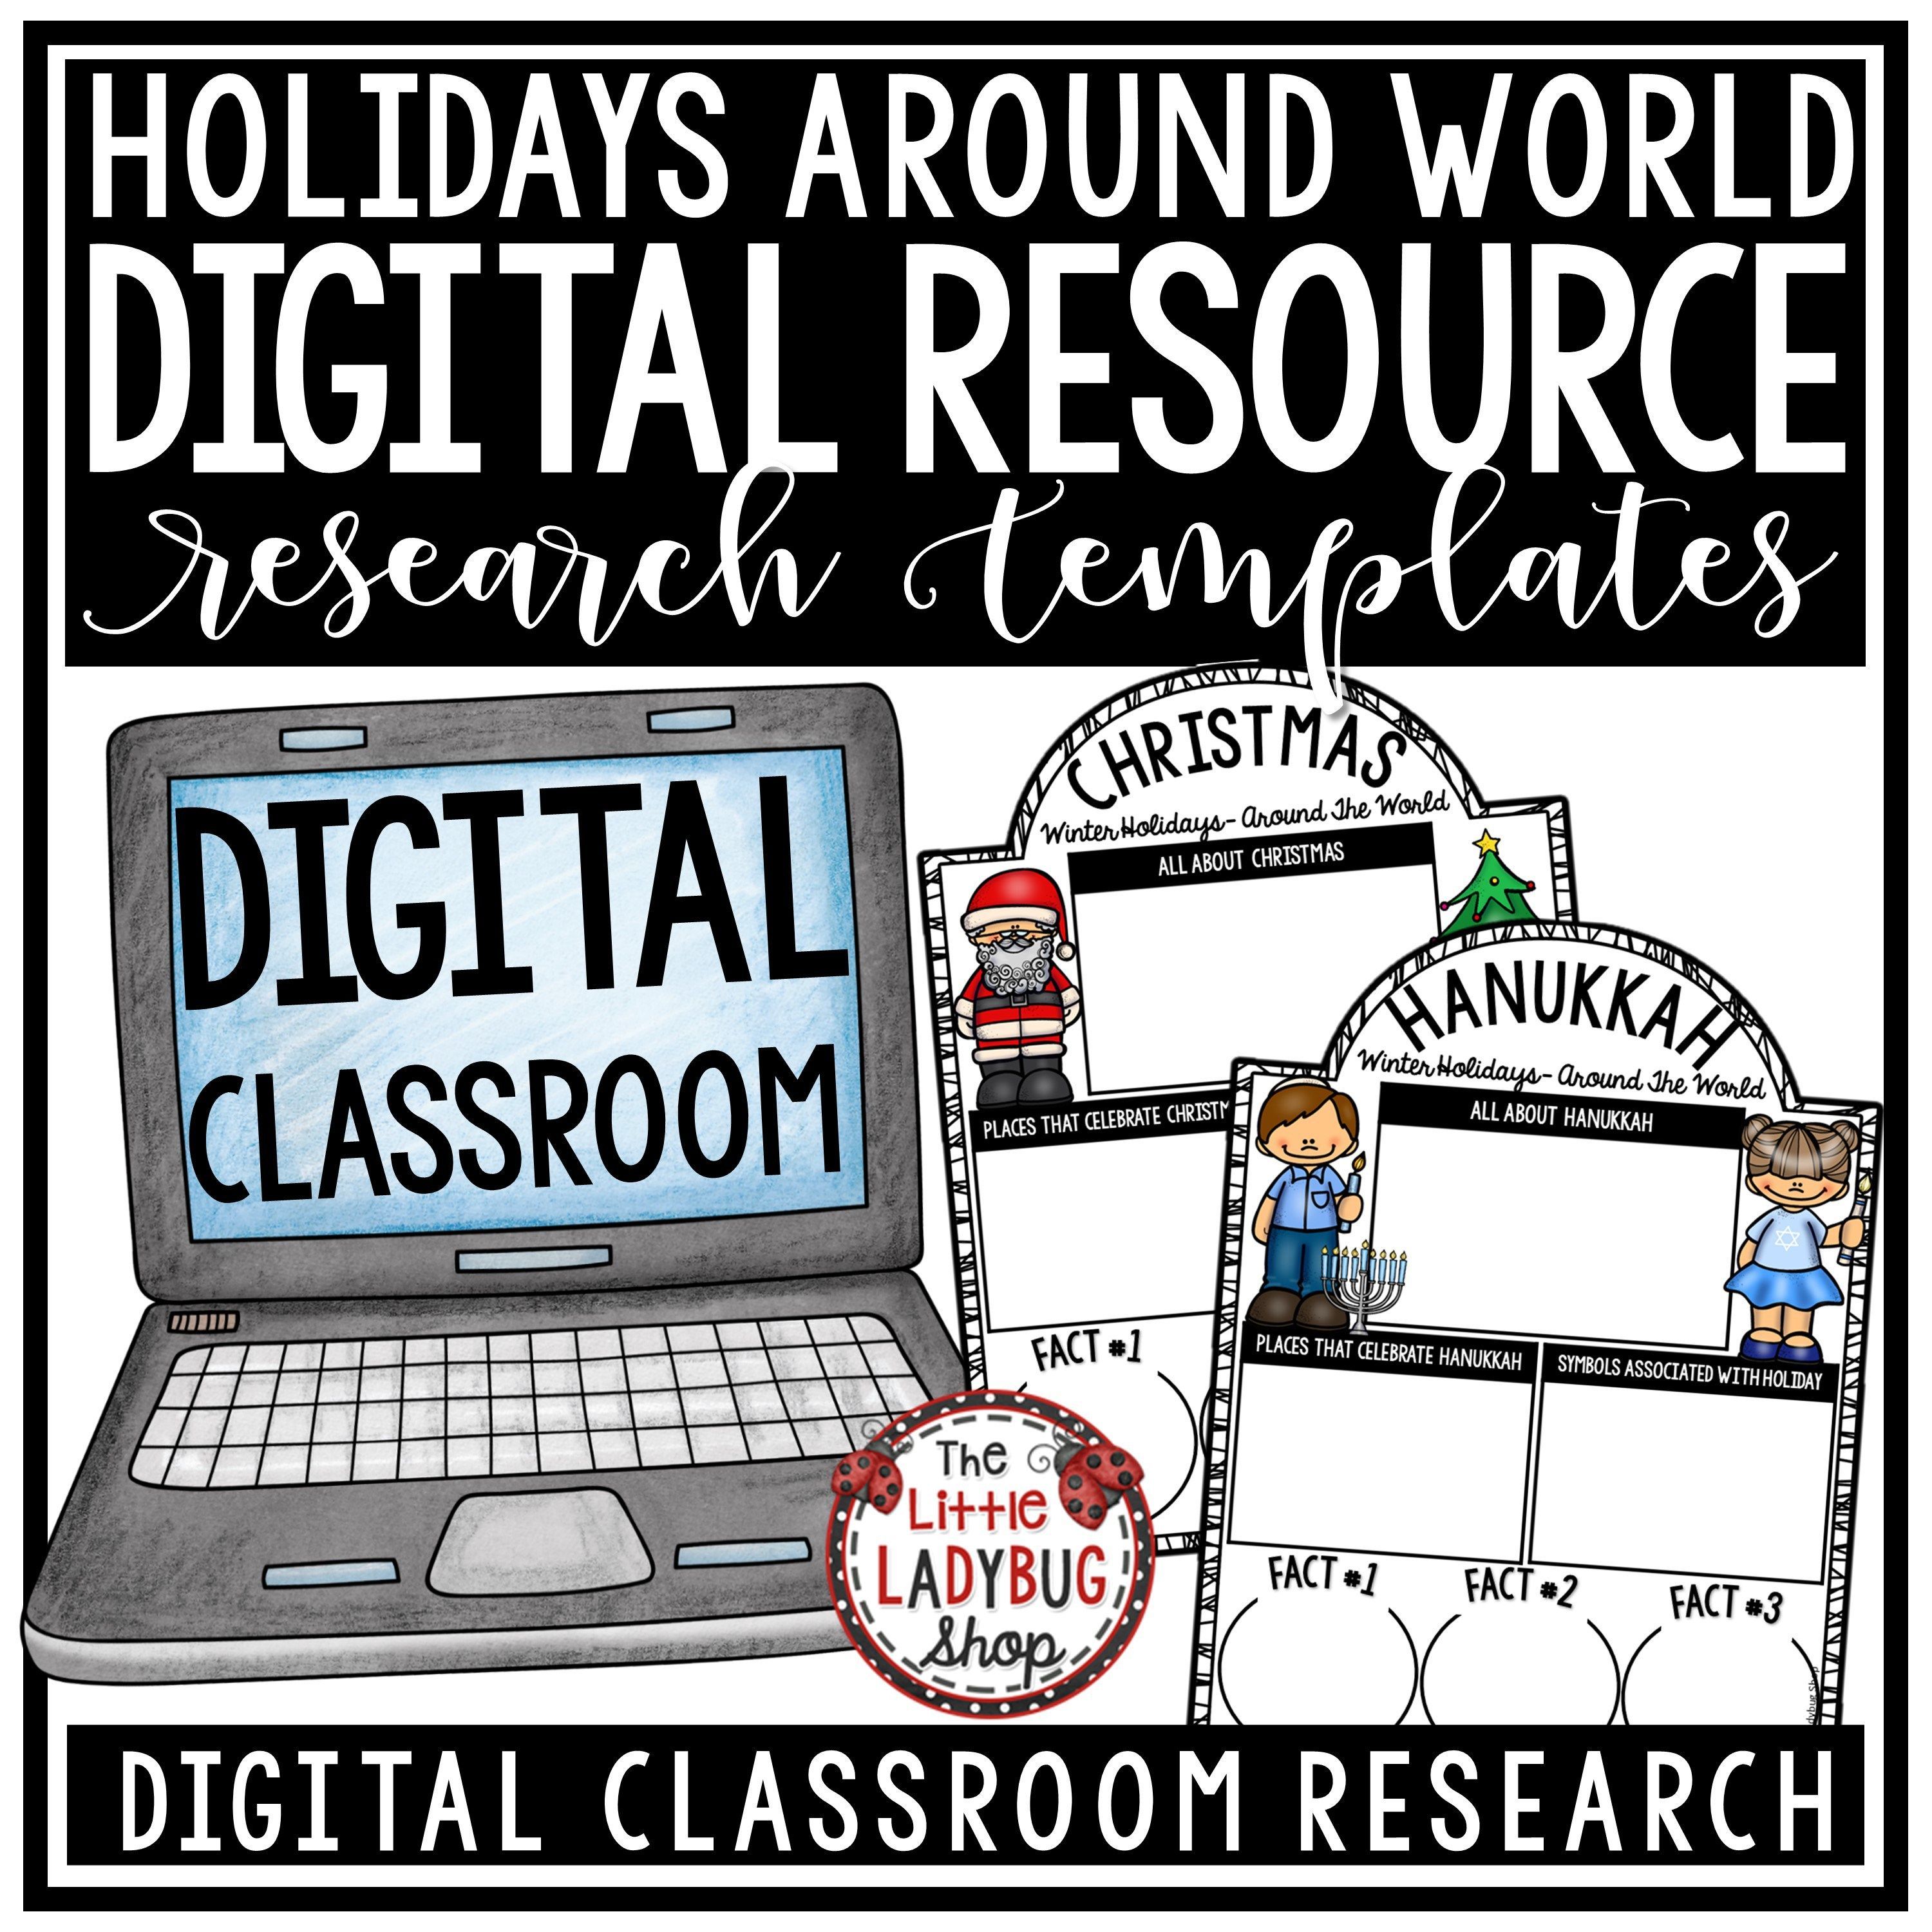 Google Classroom Activity Winter Holiday Around The World Research Project -   16 holiday Around The World lesson plans
 ideas